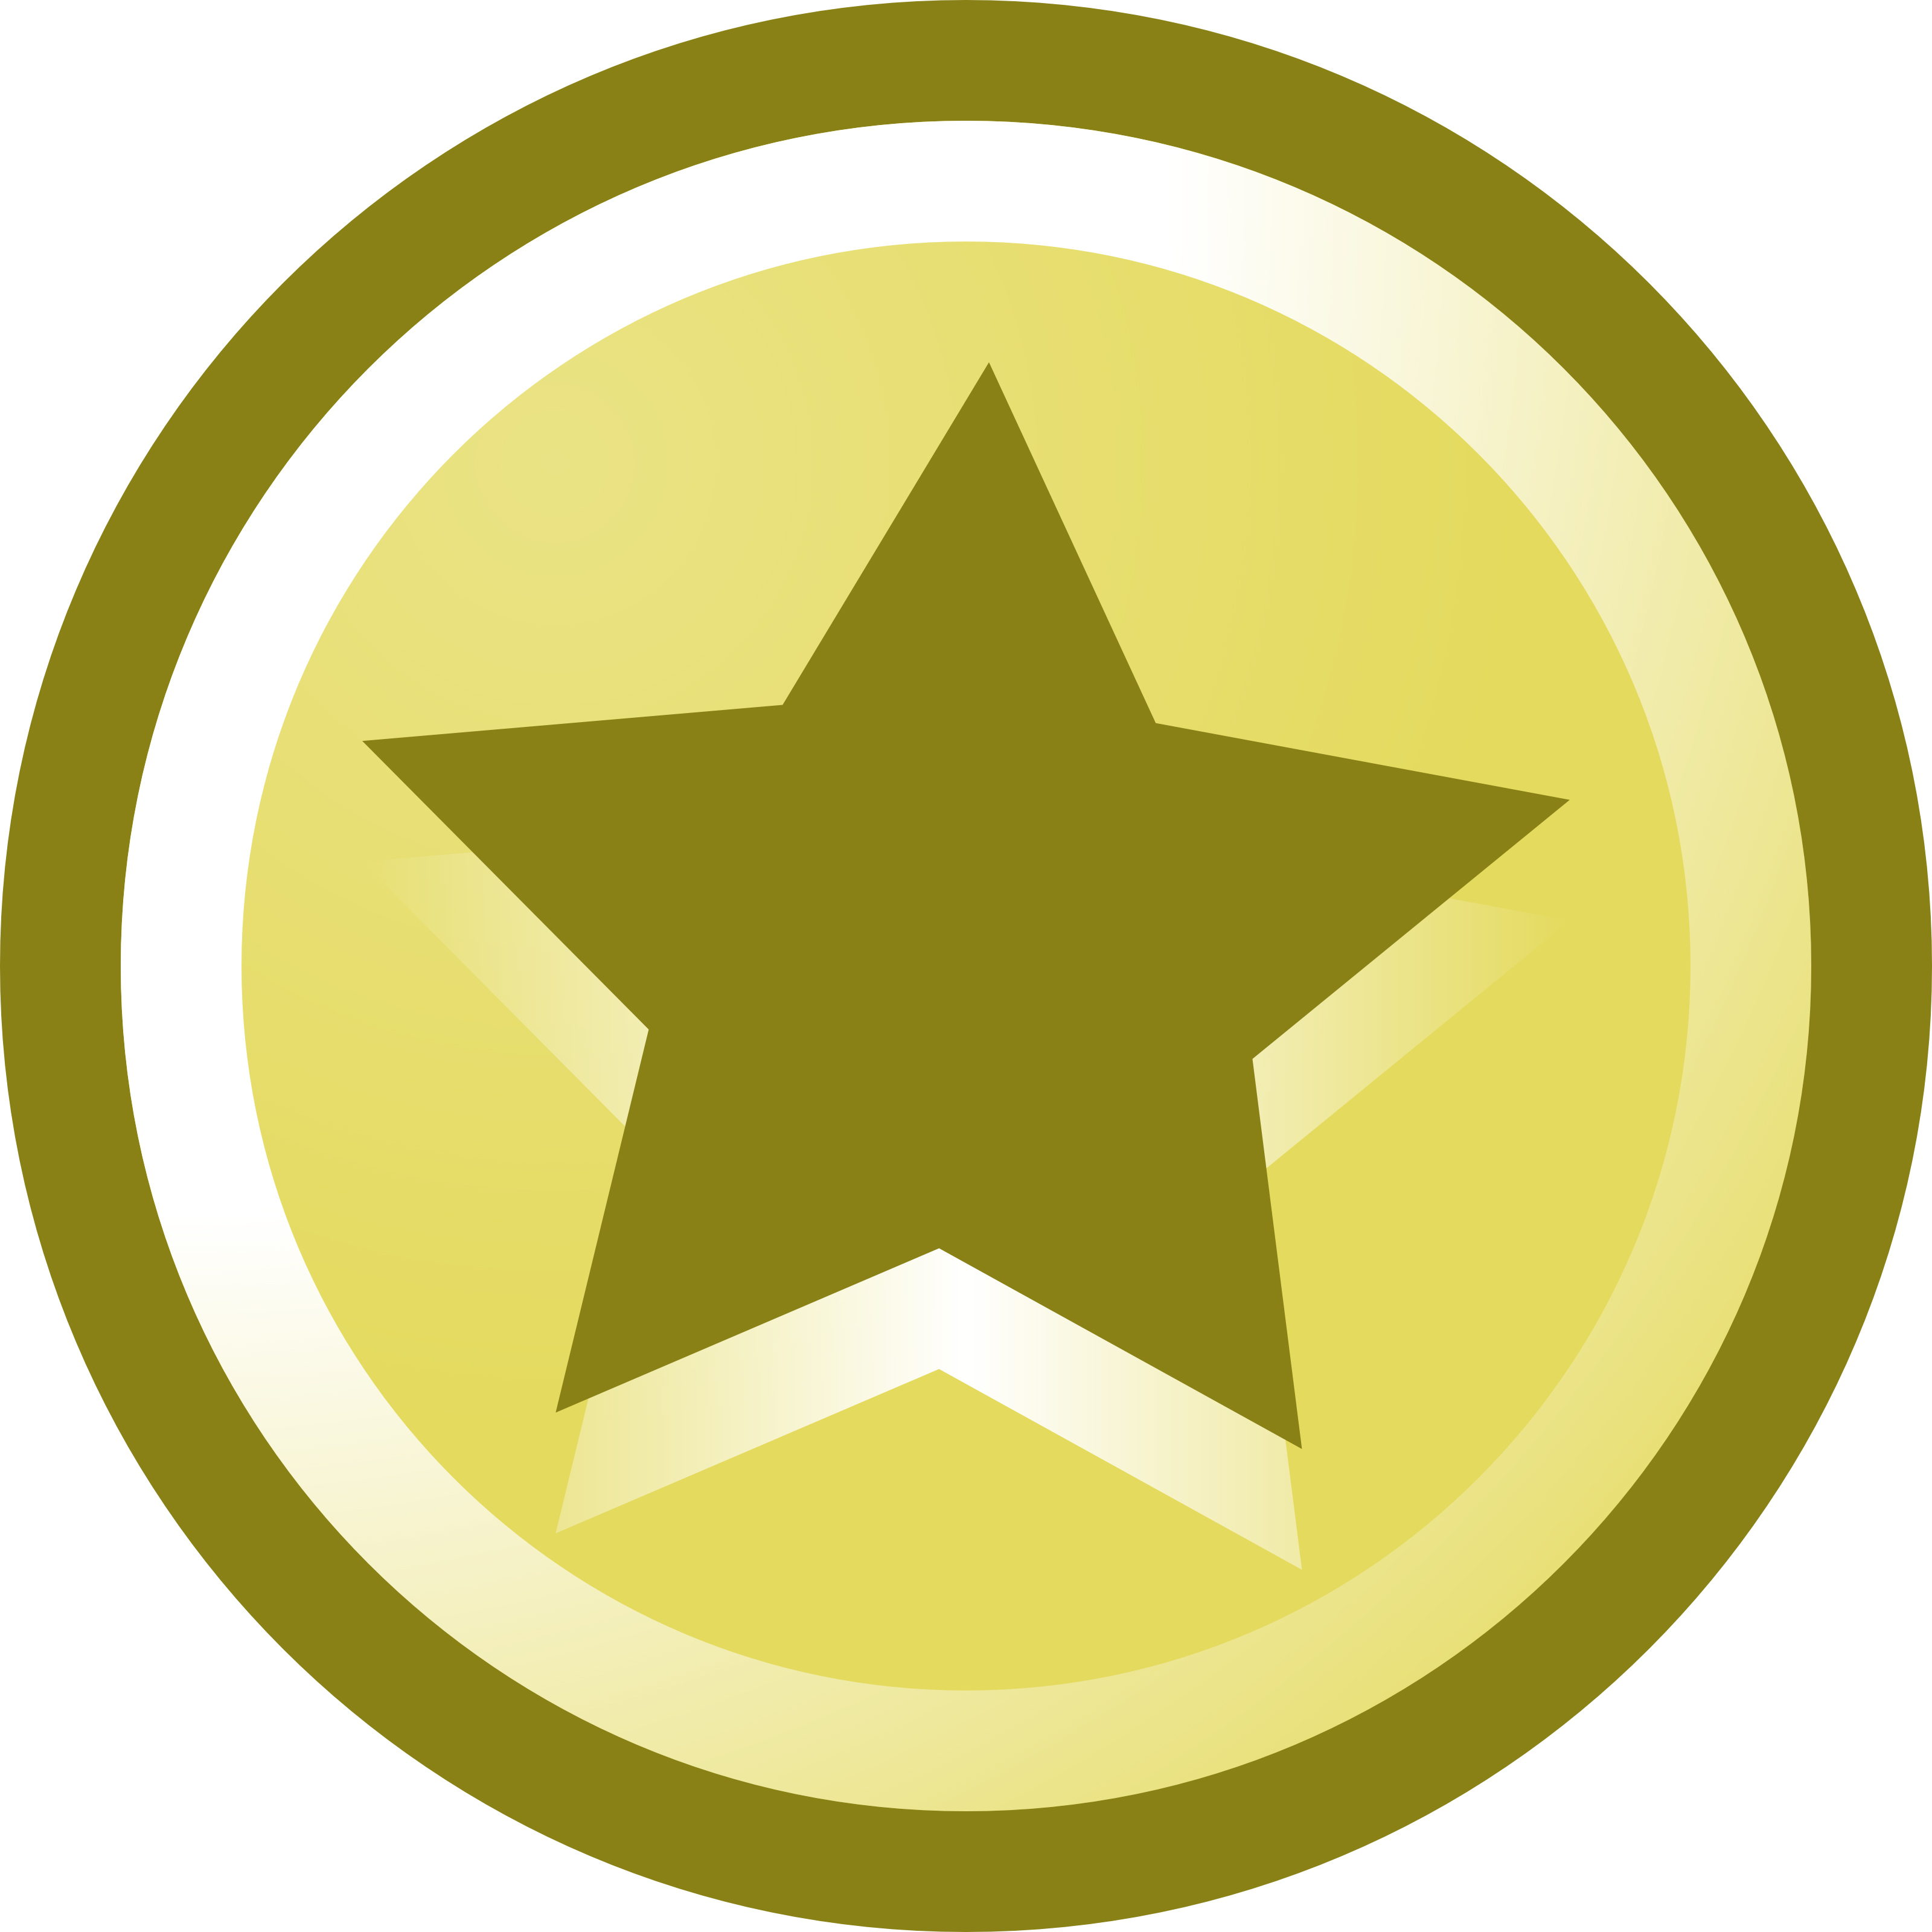 Free Vector Illustration Of A Star Icon